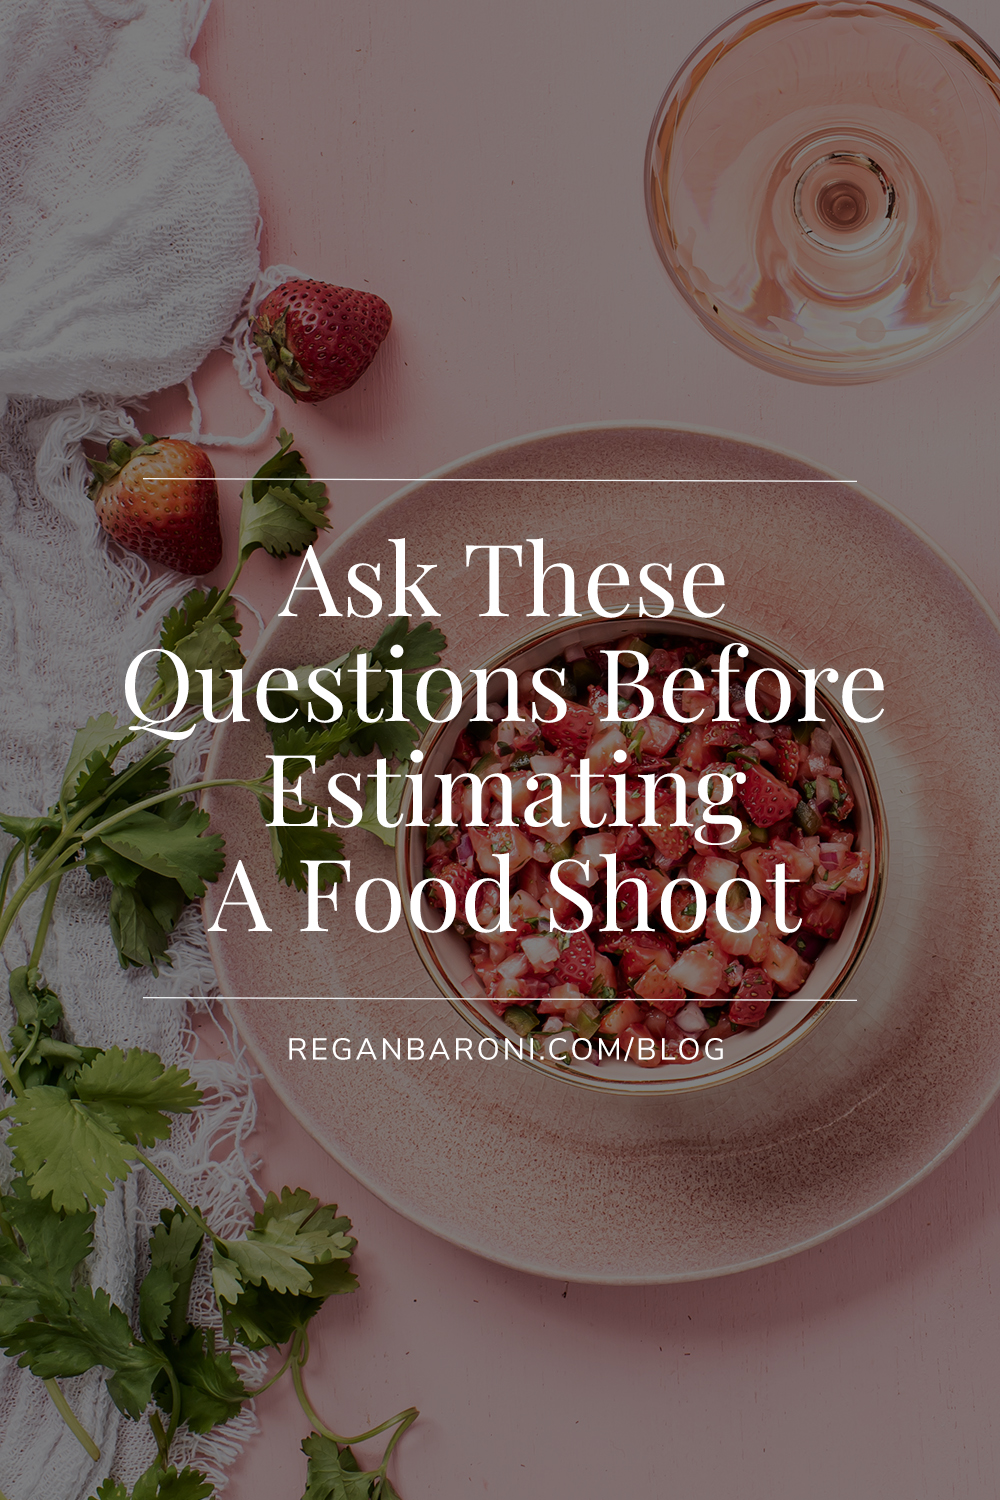 Questions To Ask Before Estimating a Food Shoot